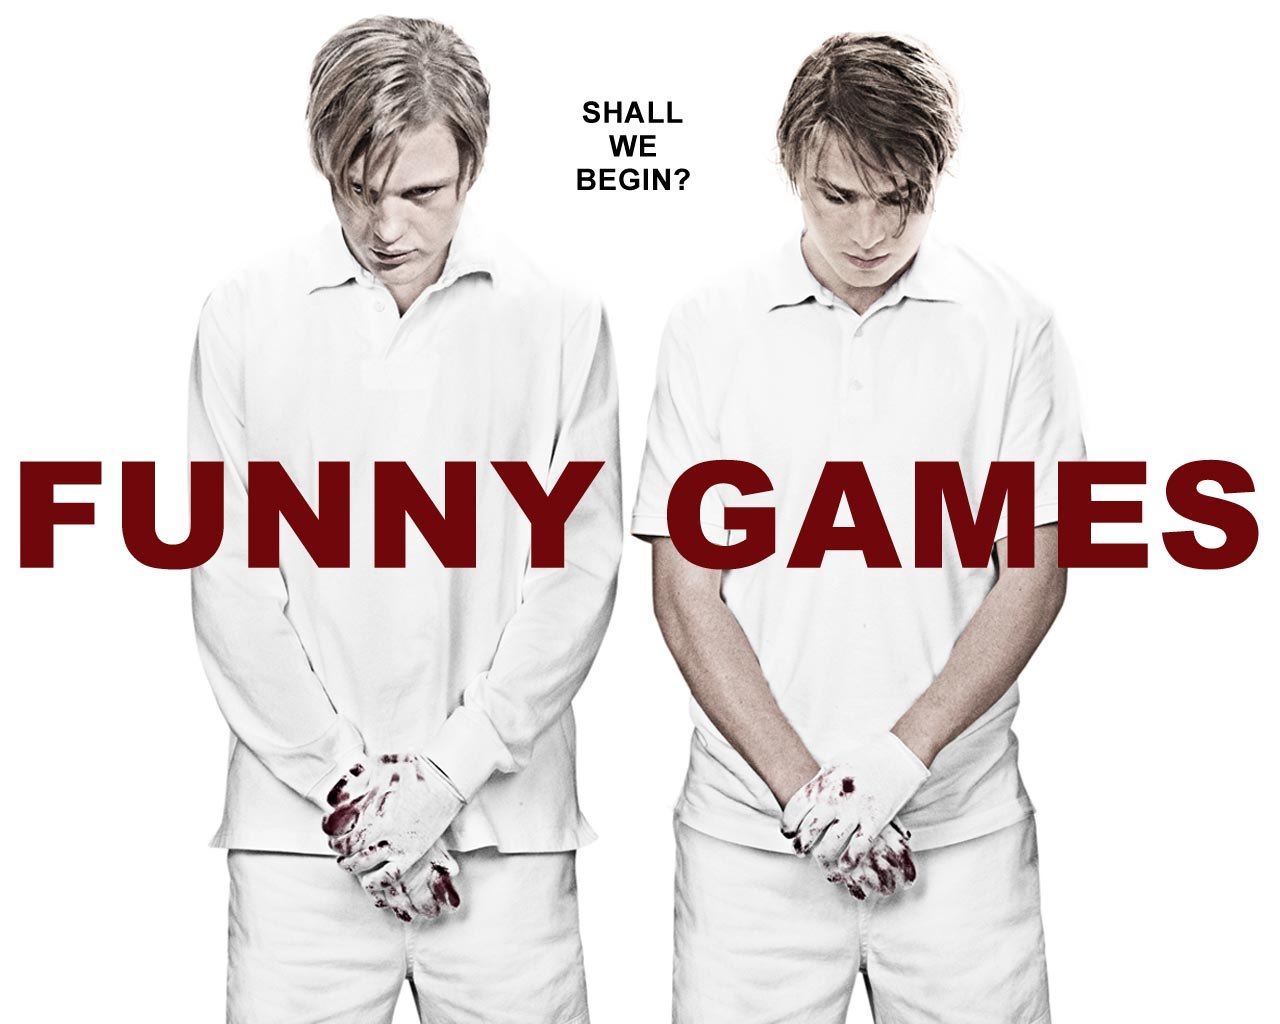 Funny Games movie